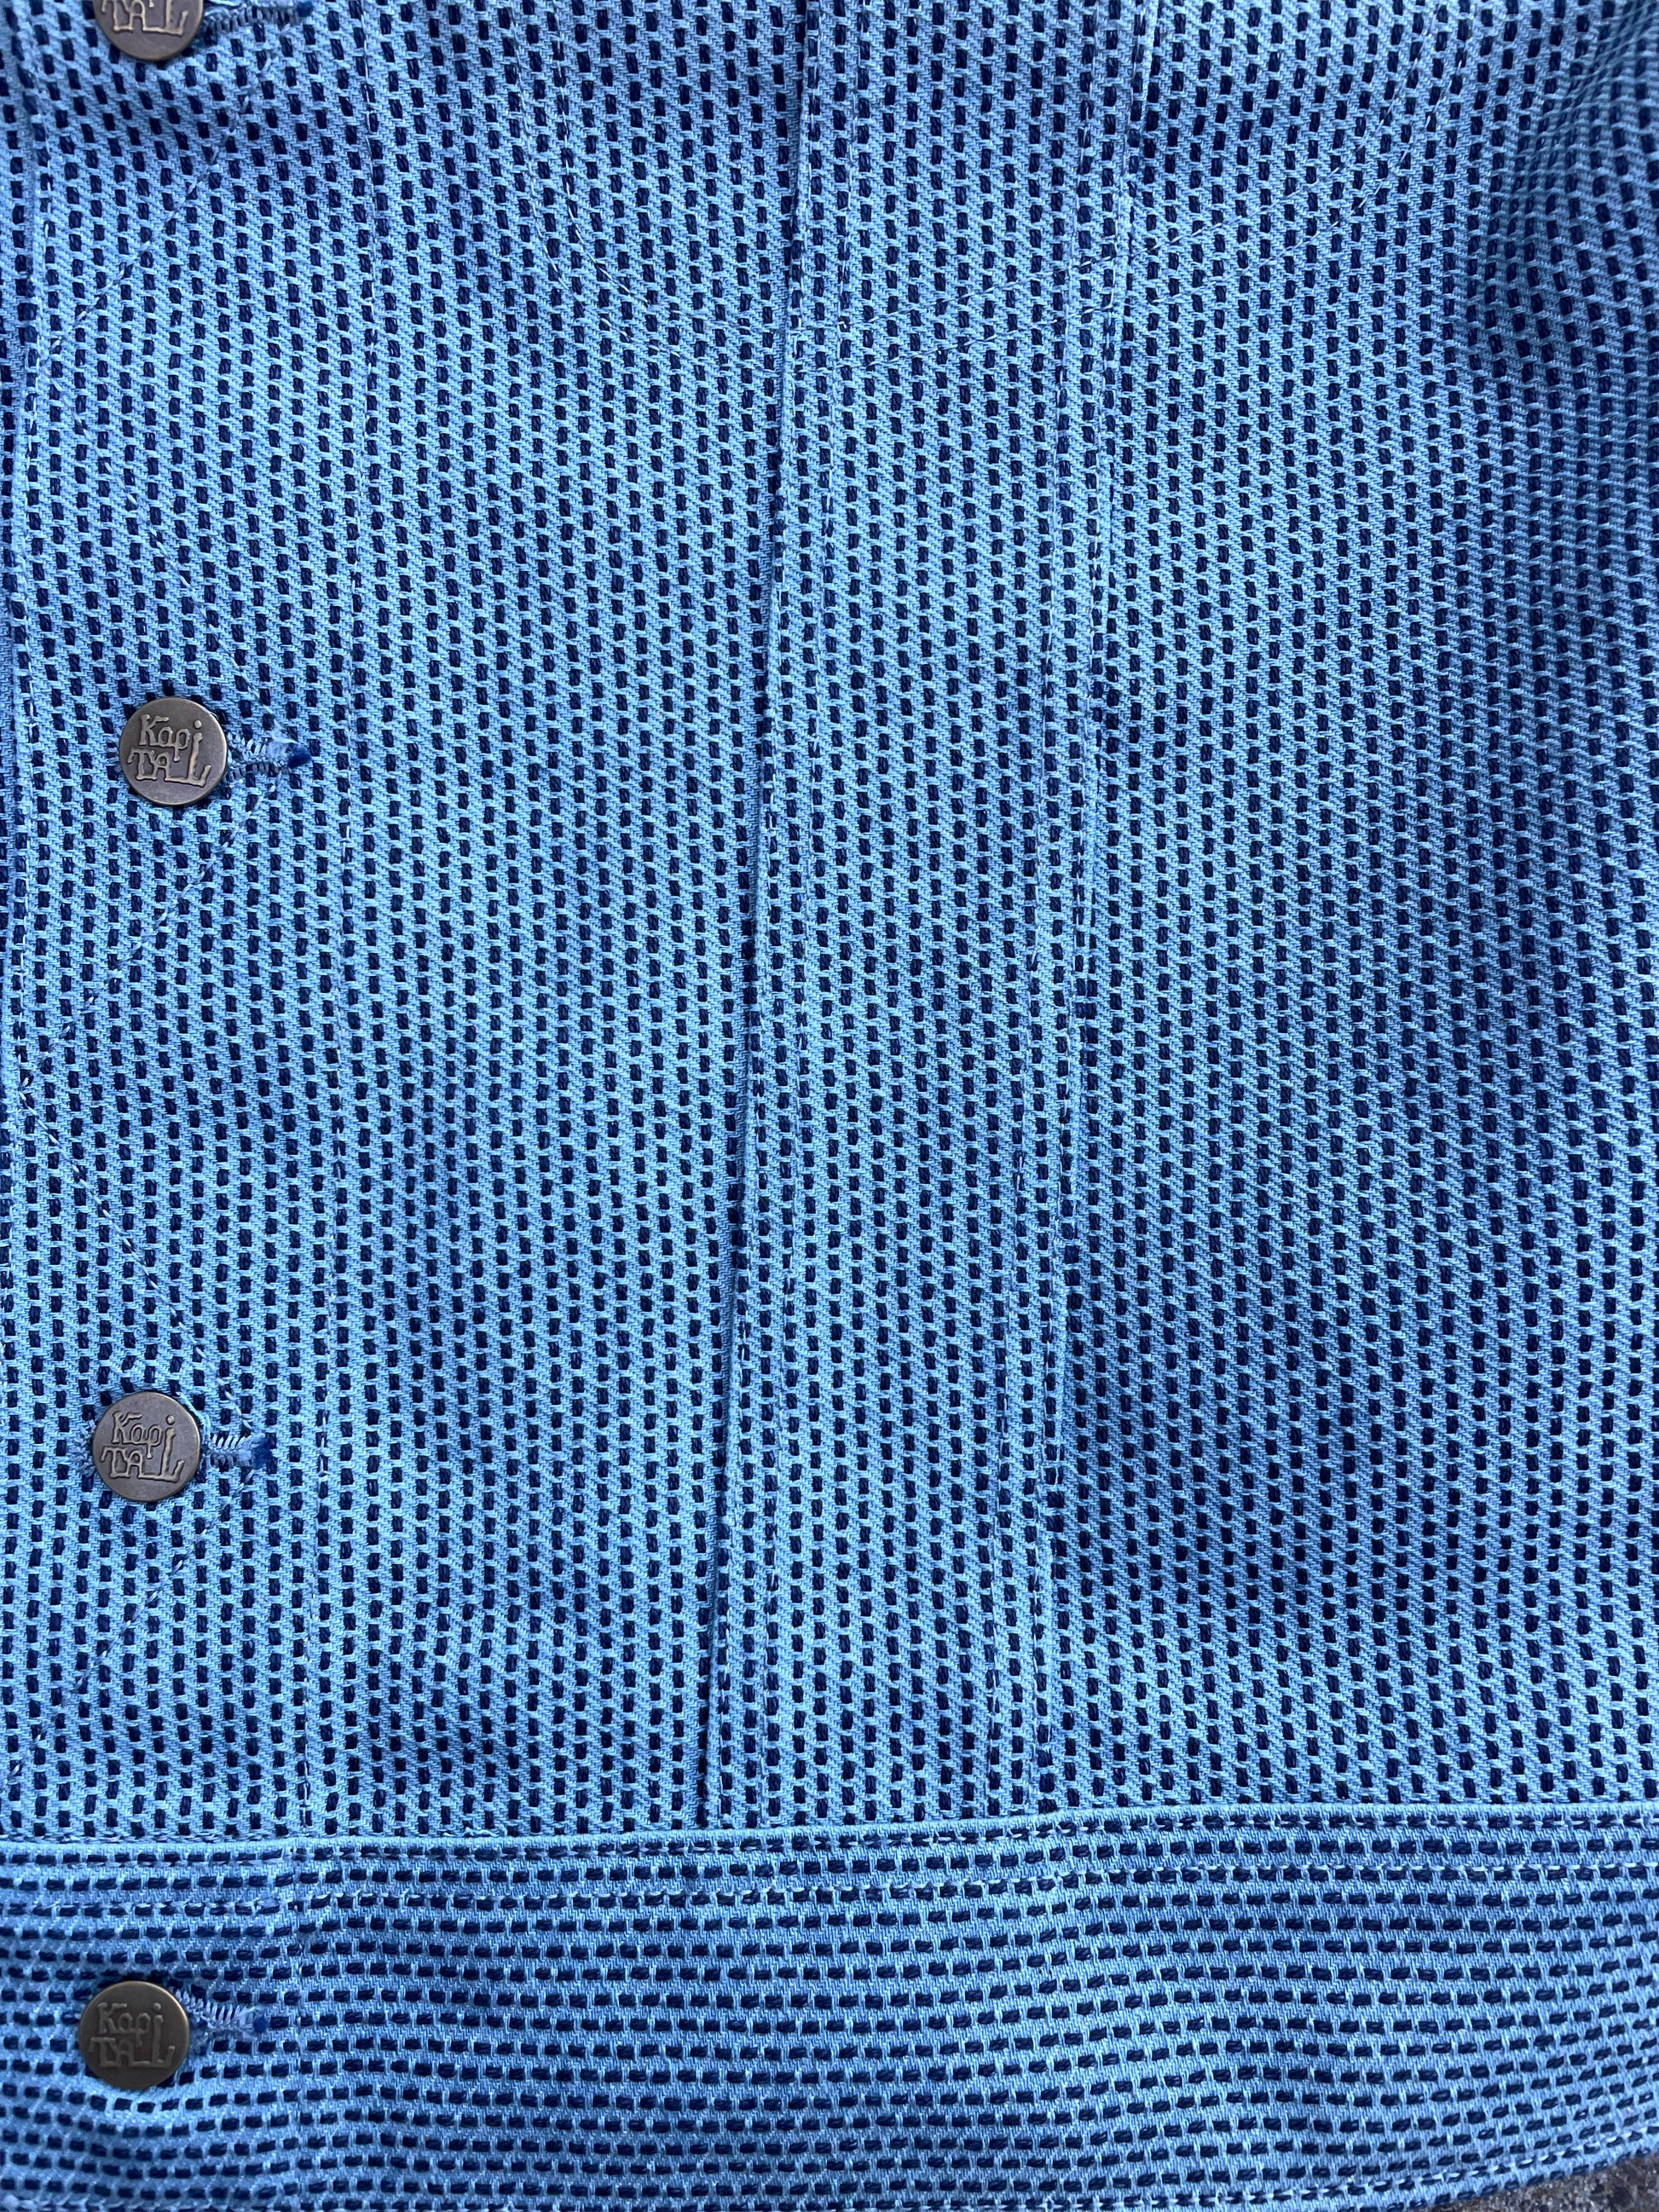 Close up shot of the texture of the jacket